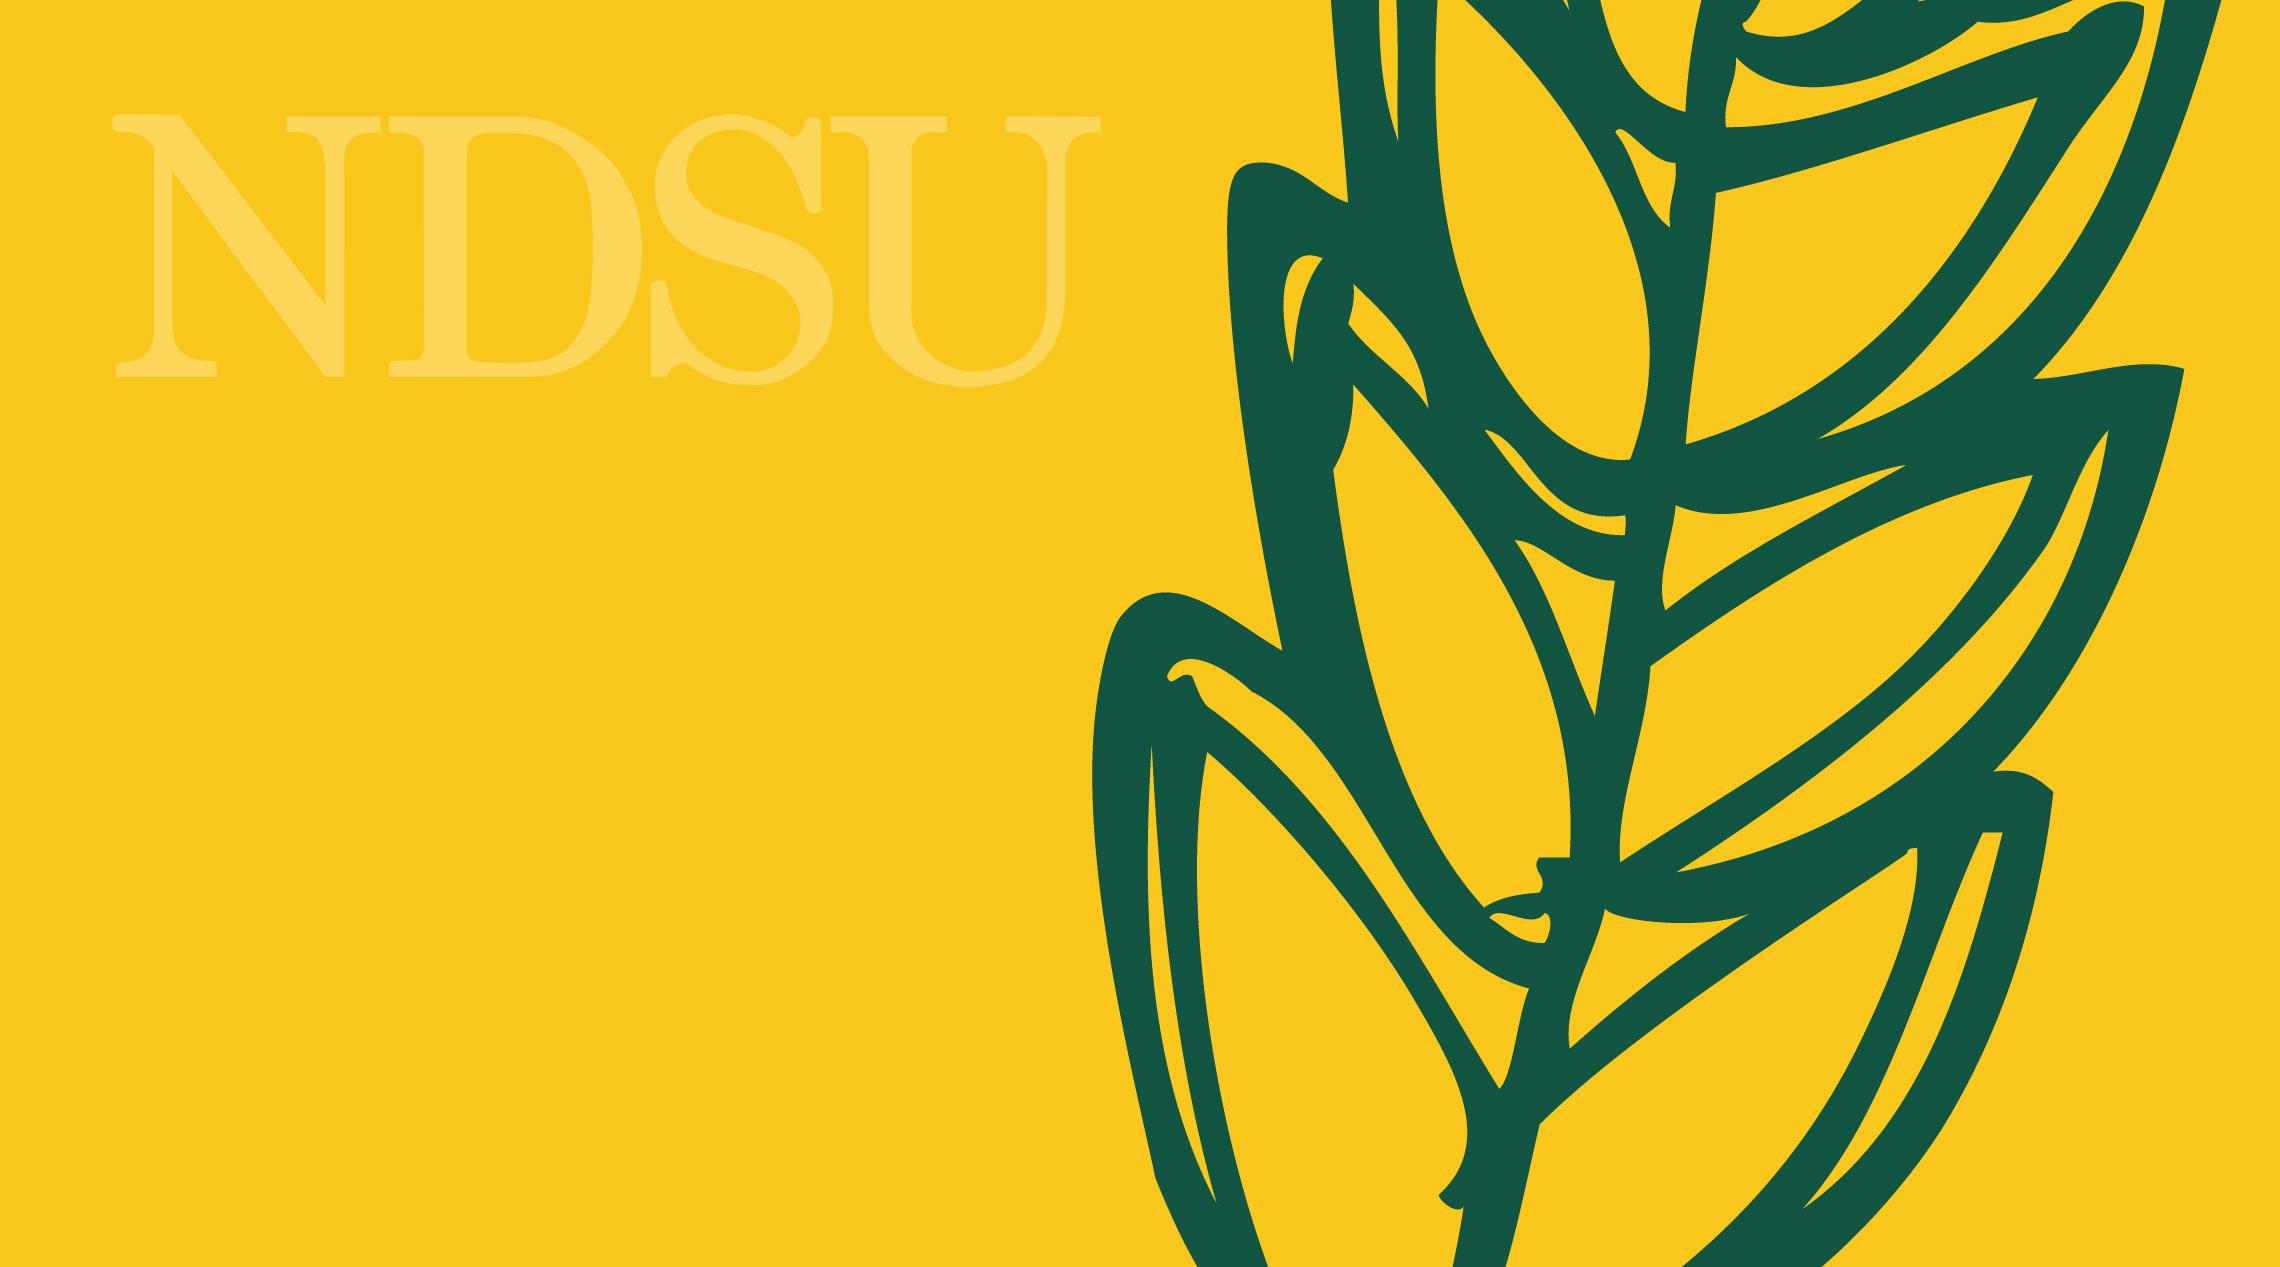 Crops  NDSU Agriculture